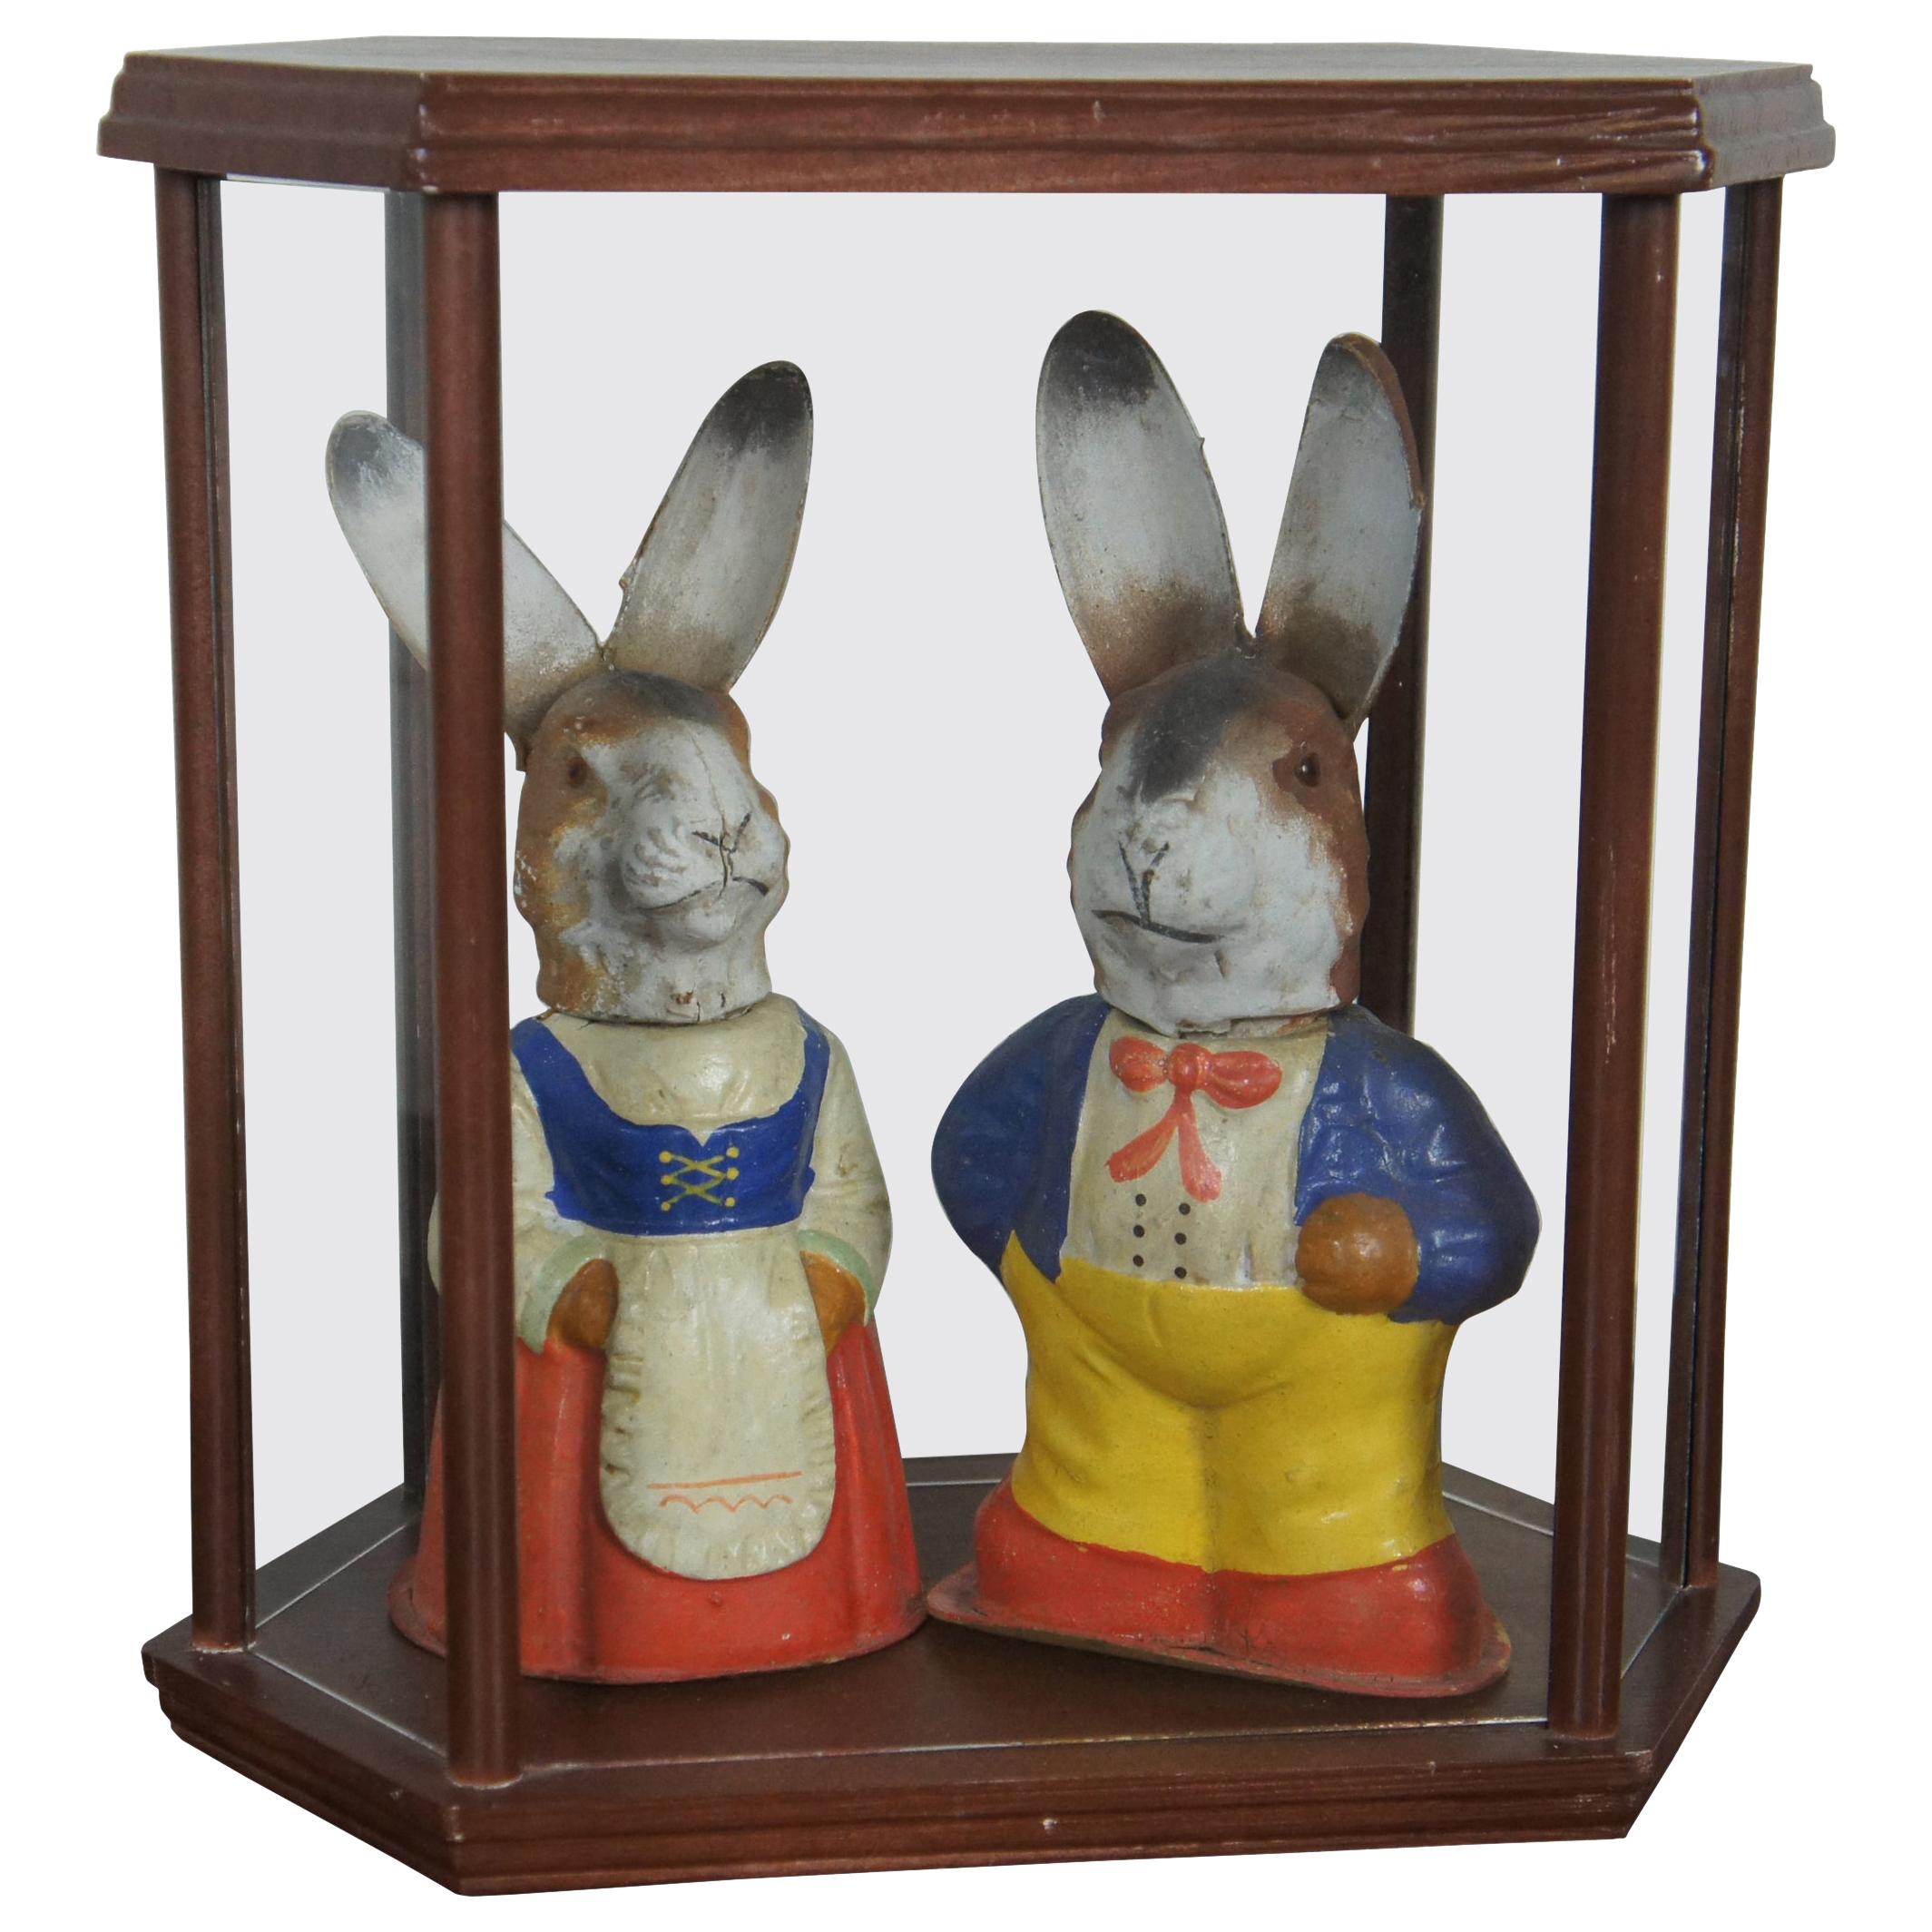 2 Antique German Paper Mâché Easter Rabbit Candy Containers & Display Curio Case